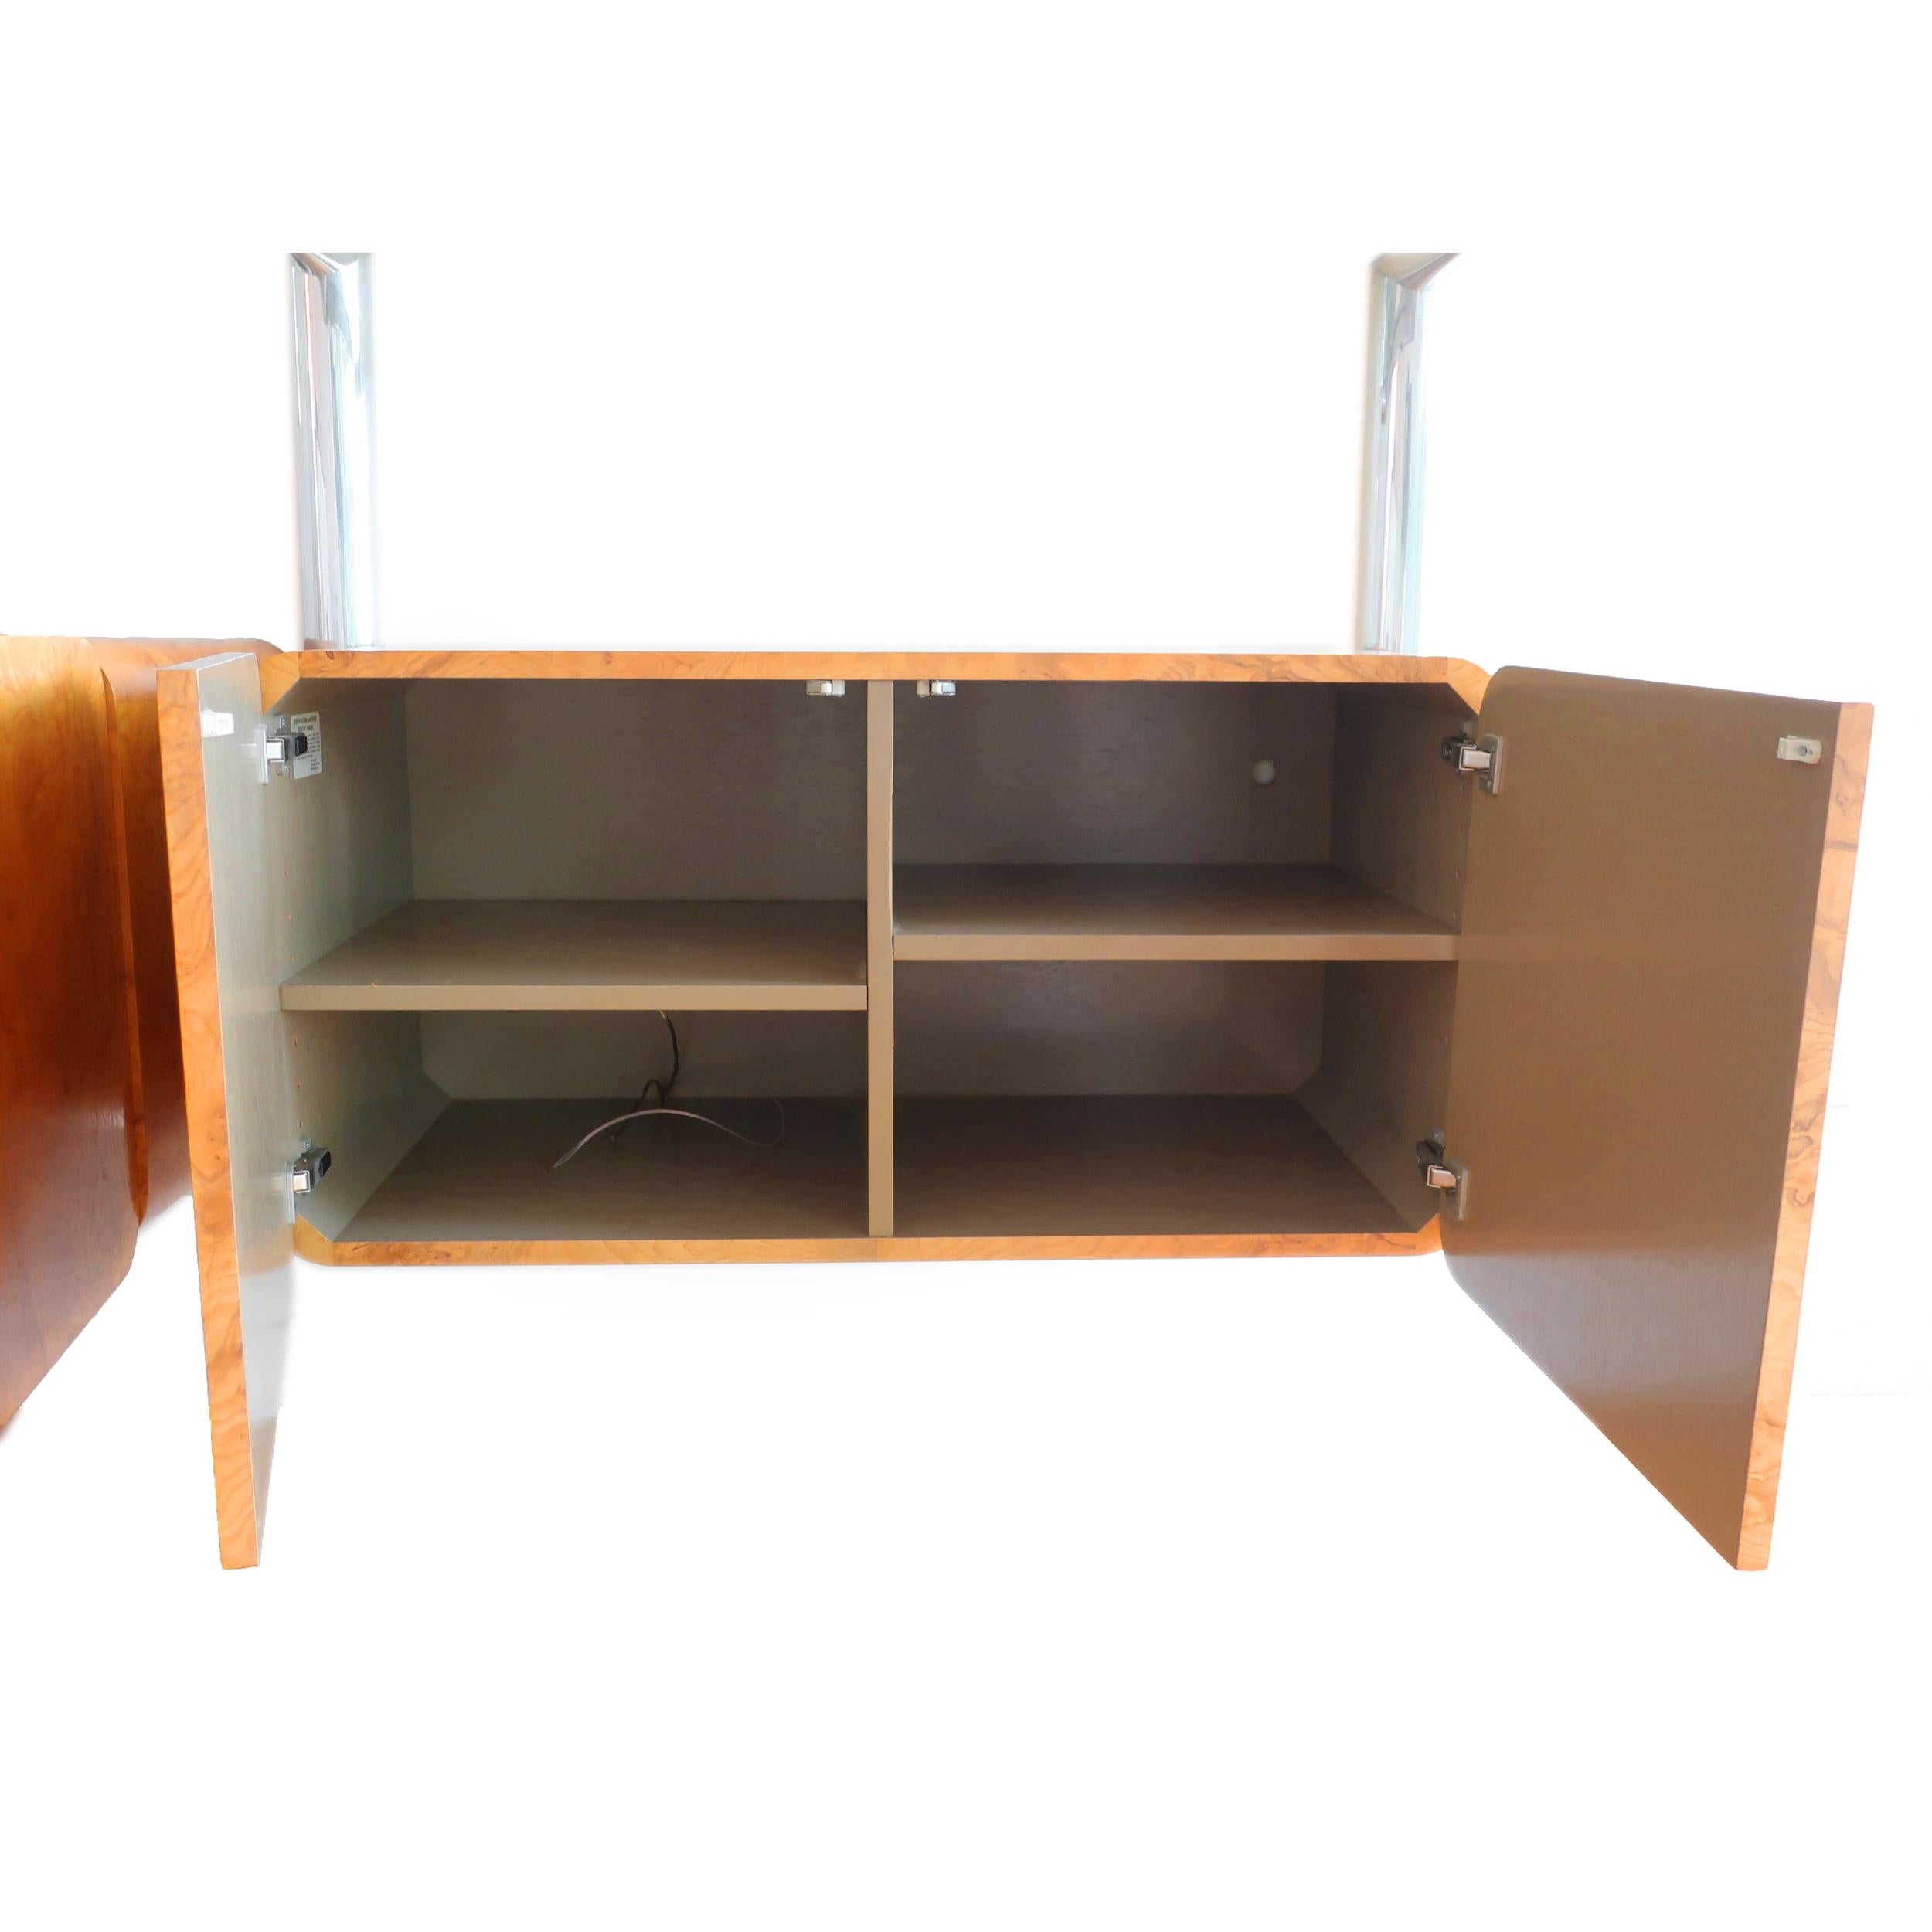 1970s Aluminum and Glass Orba Wall Unit by Janet Schweitzer for Pace Collection For Sale 4